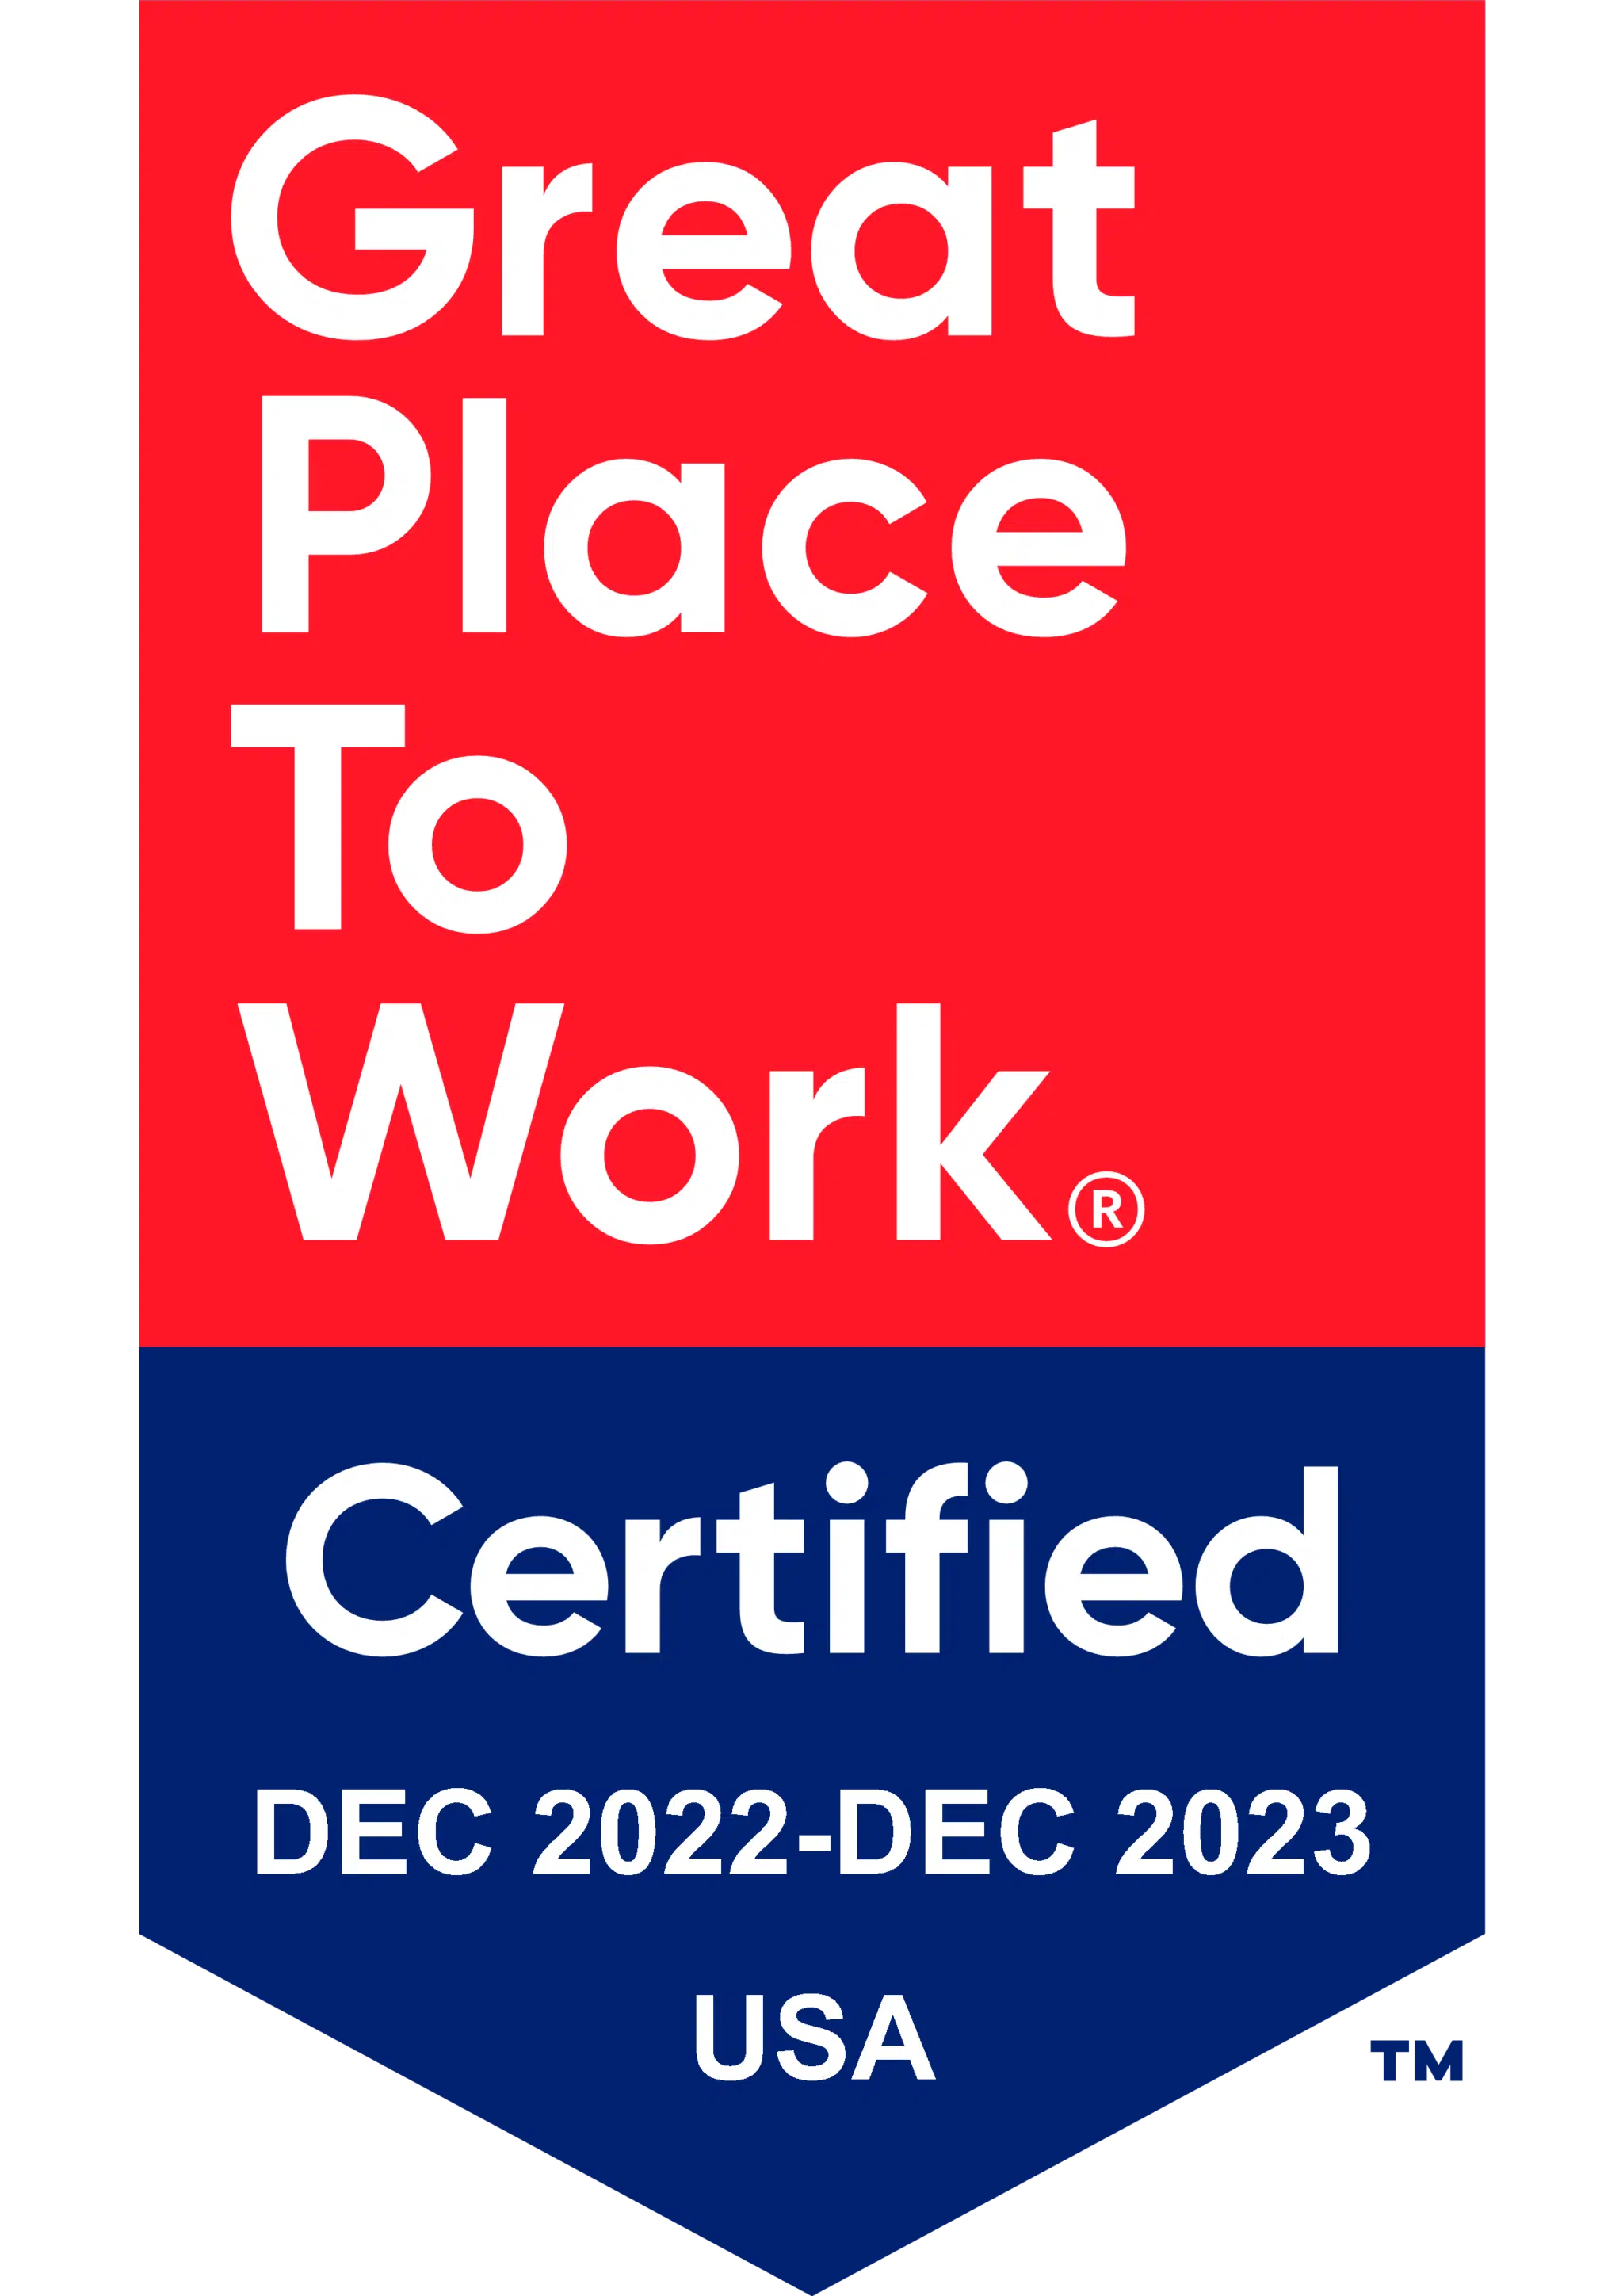 Badge for Great Place to Work Certification Dec 2022 - Dec 2023